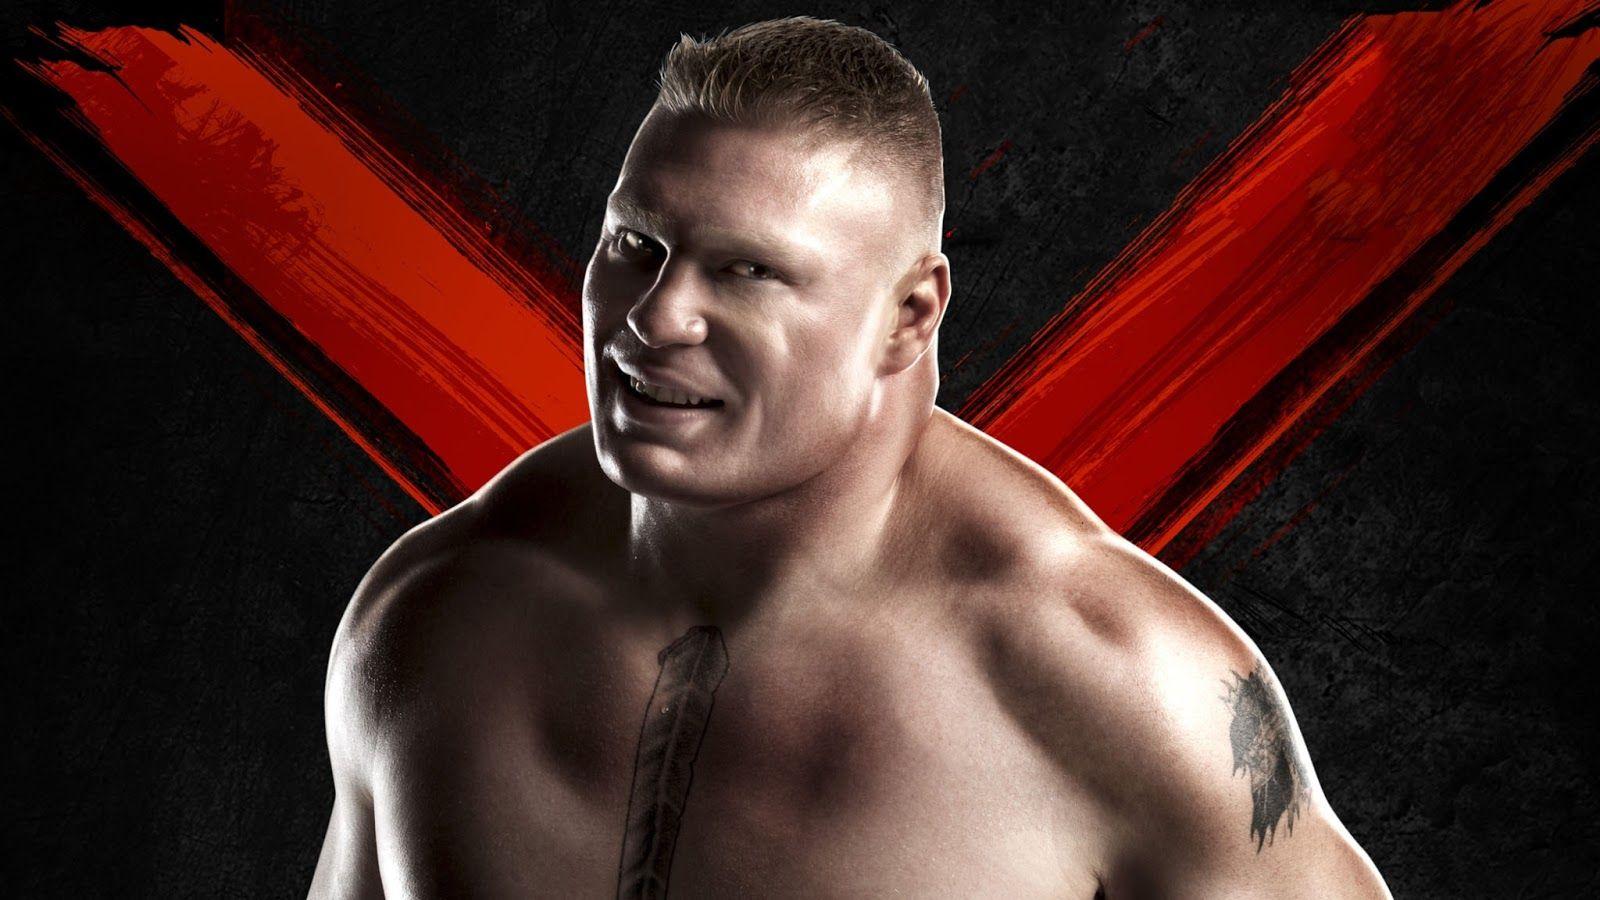 Information With HD Wallpaper: Brock Lesnar